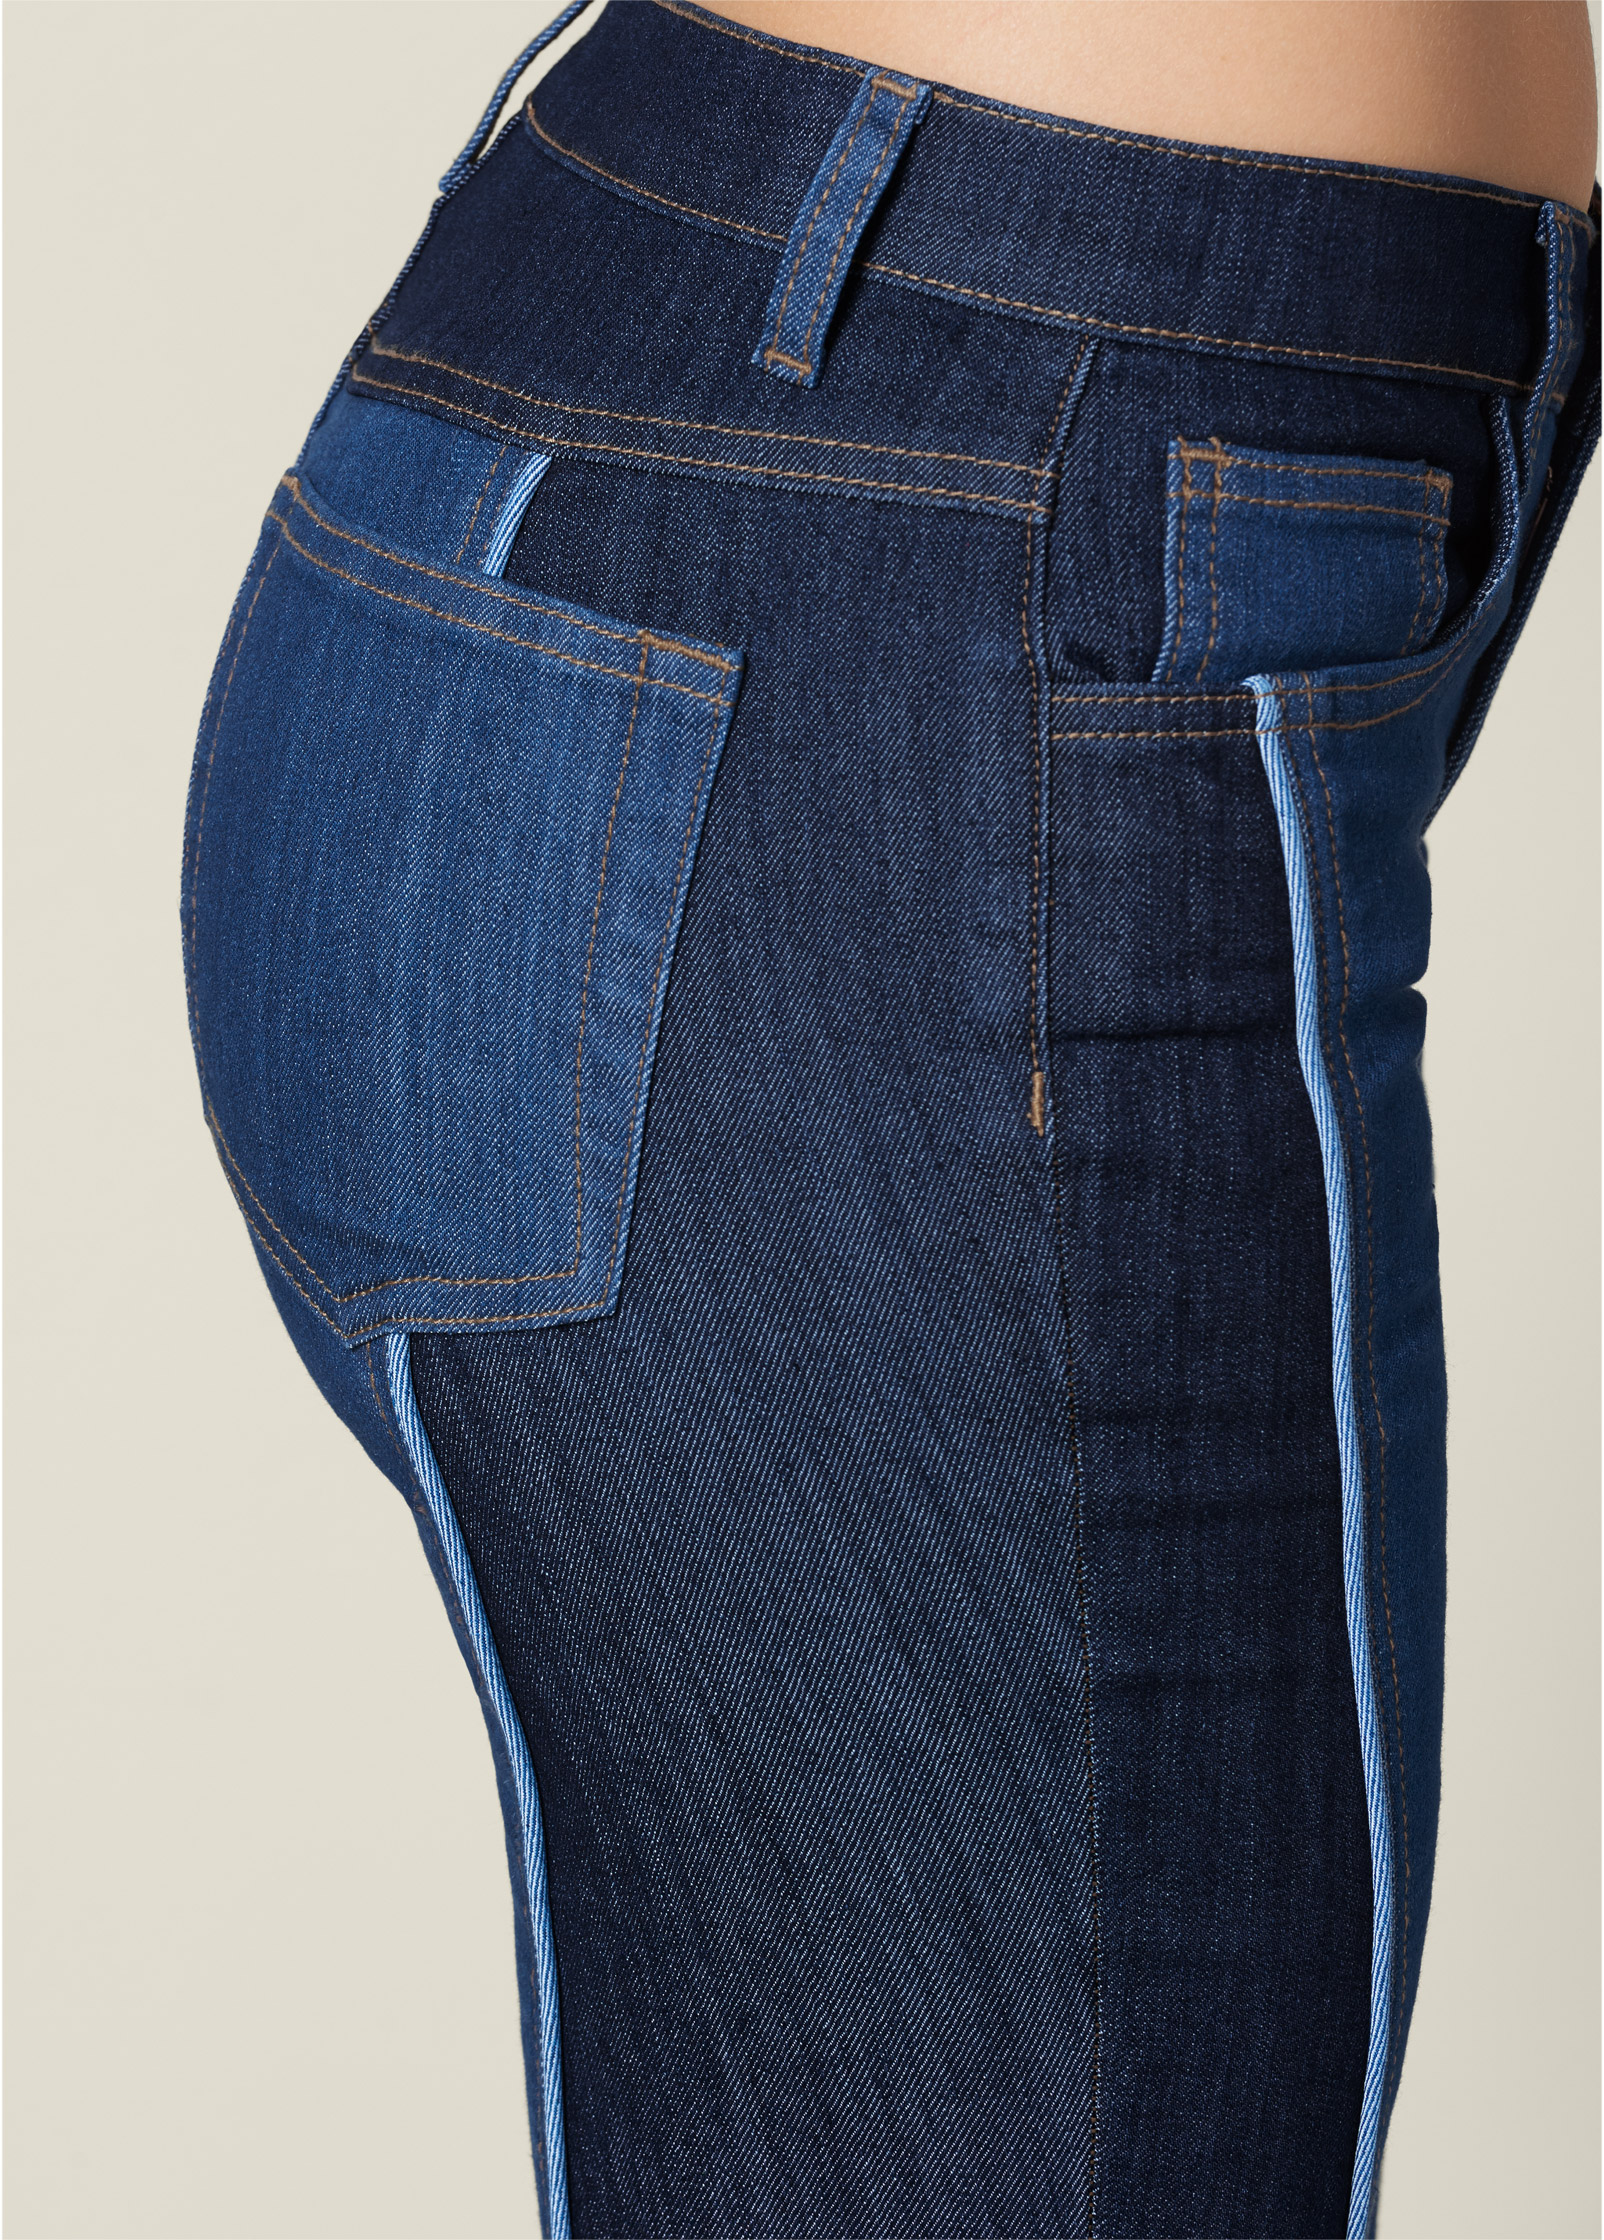 plus size two tone jeans